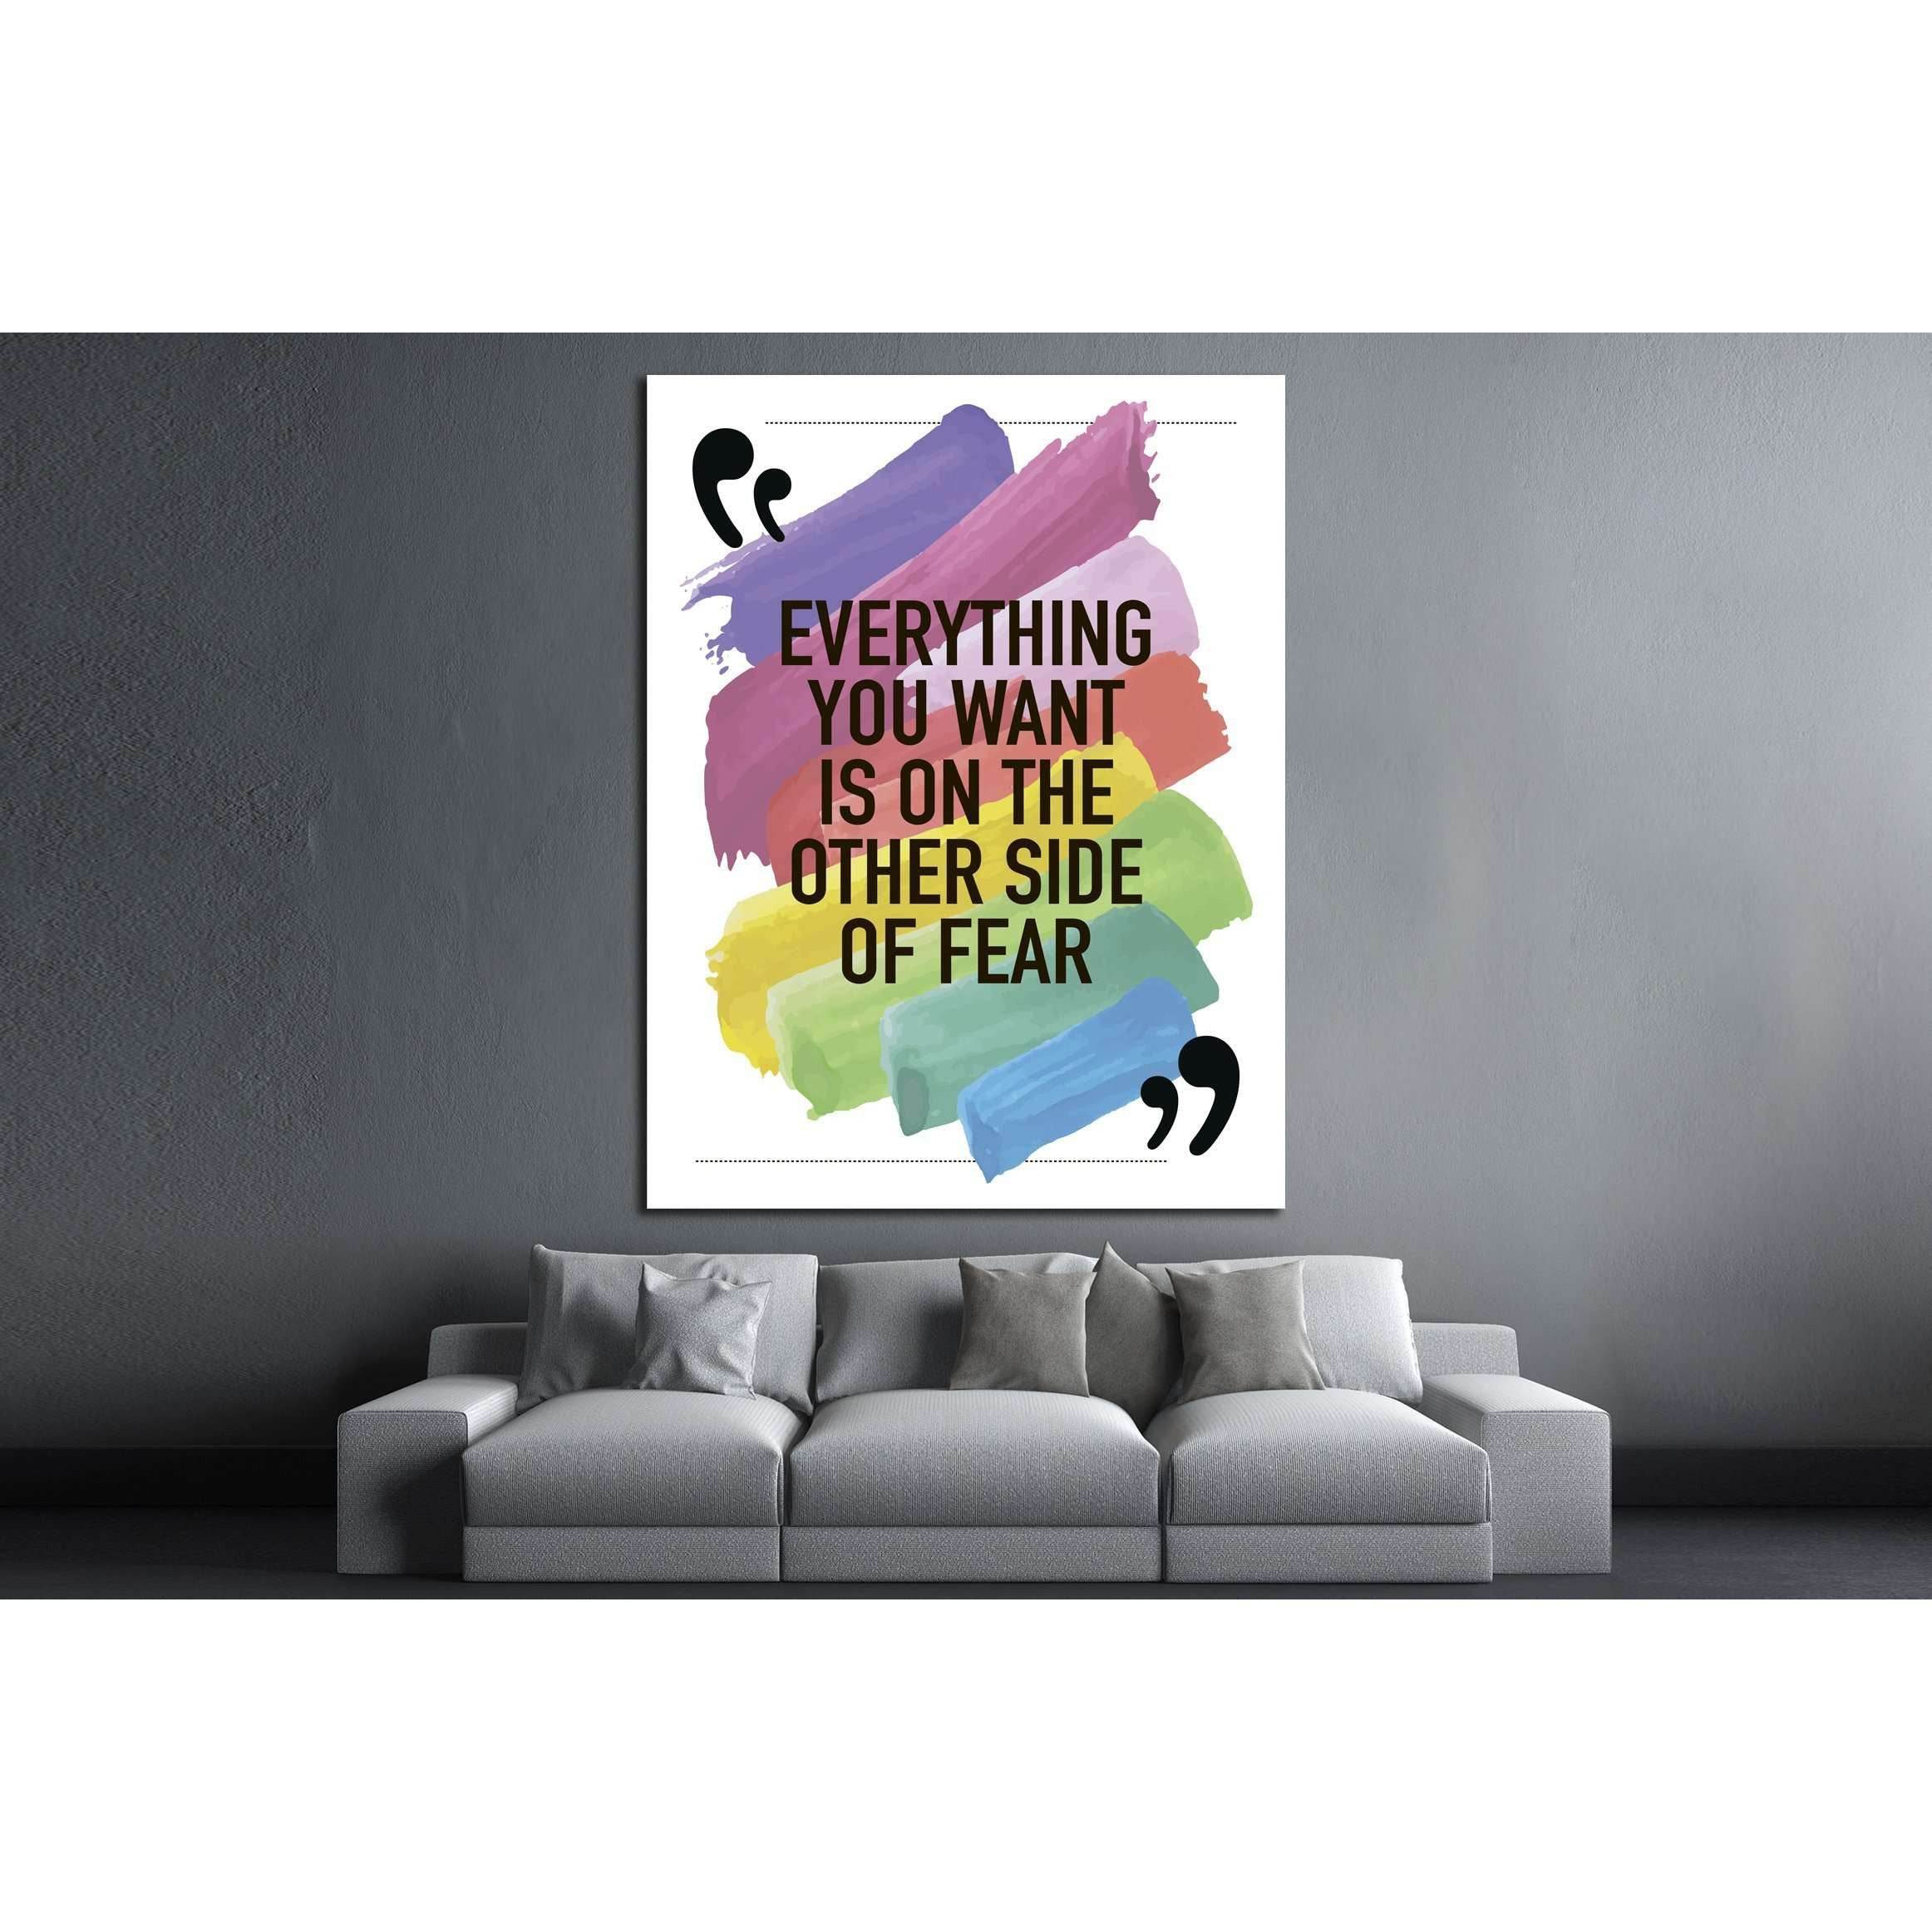 Everything you want is on the other side of fear №4606 Ready to Hang Canvas Print